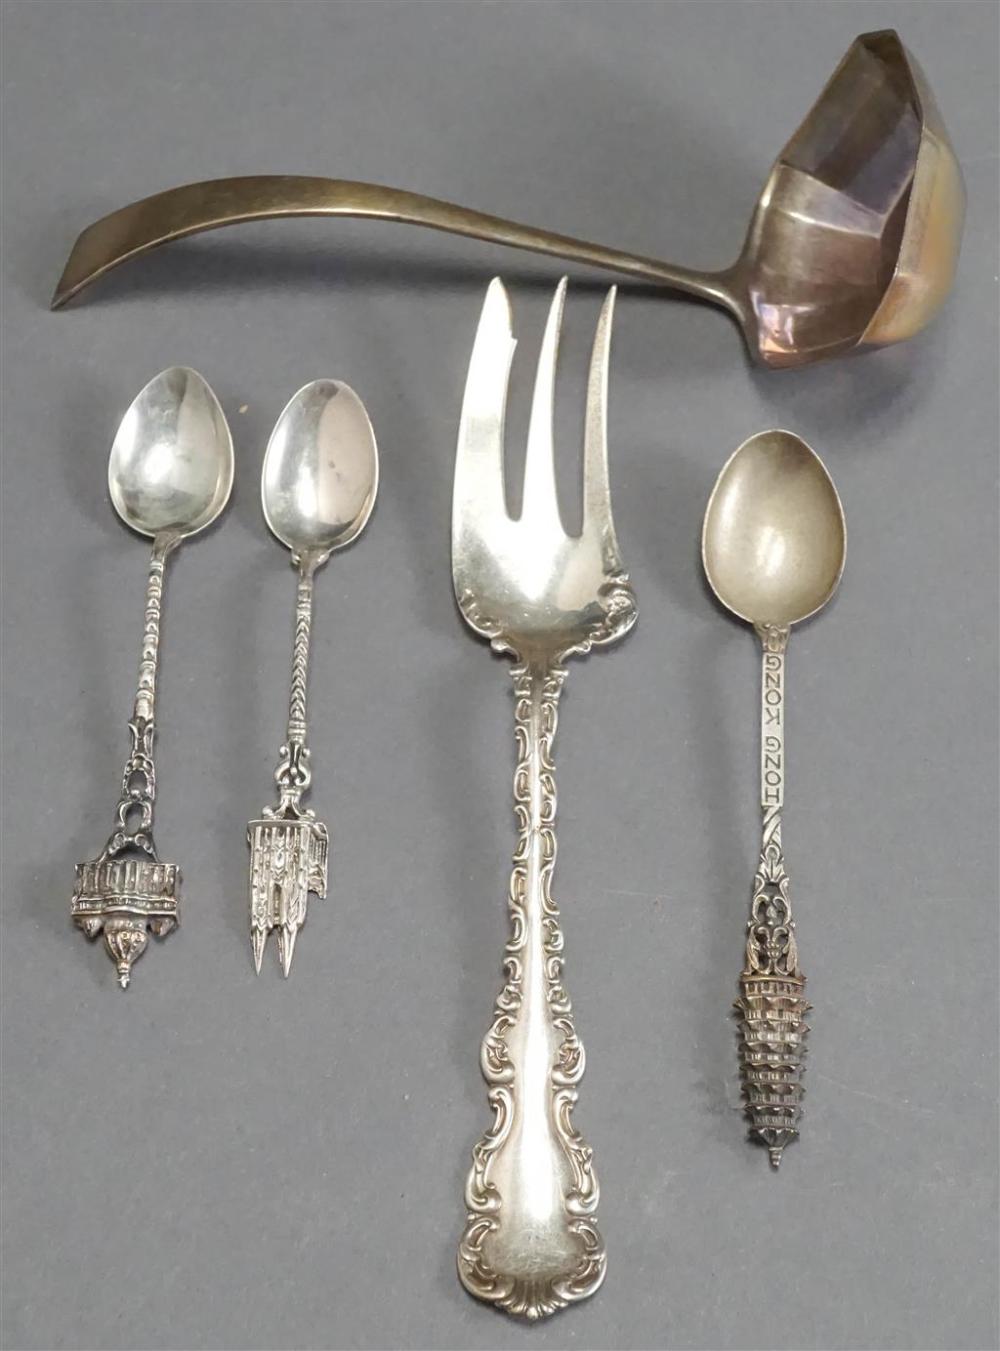 THREE STERLING SILVER FLAT ARTICLES